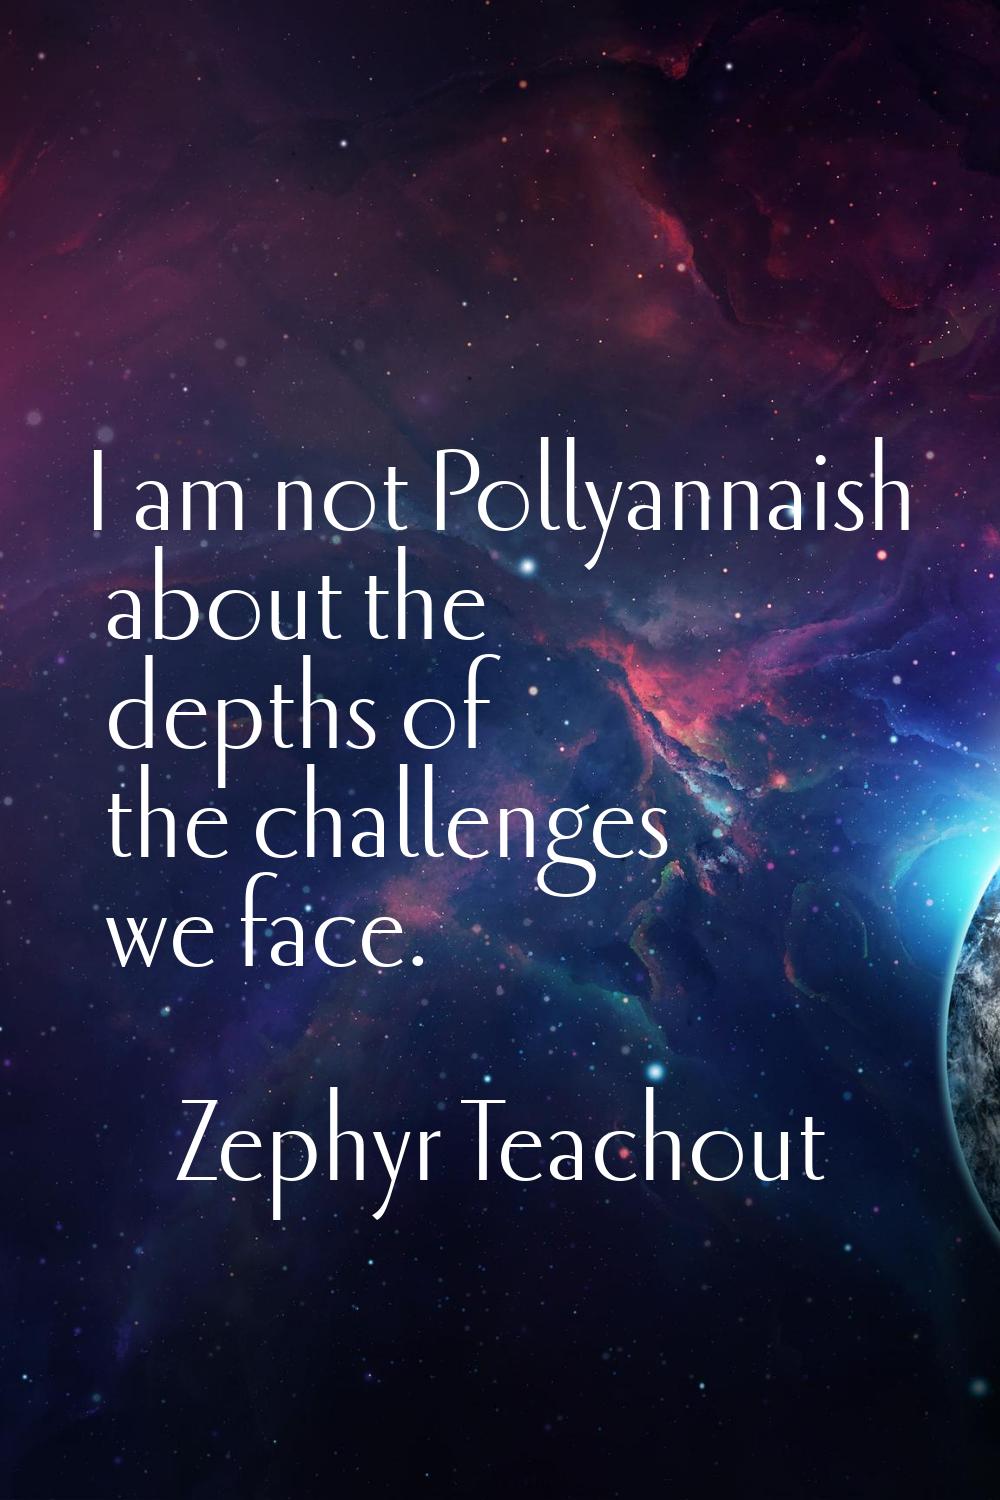 I am not Pollyannaish about the depths of the challenges we face.